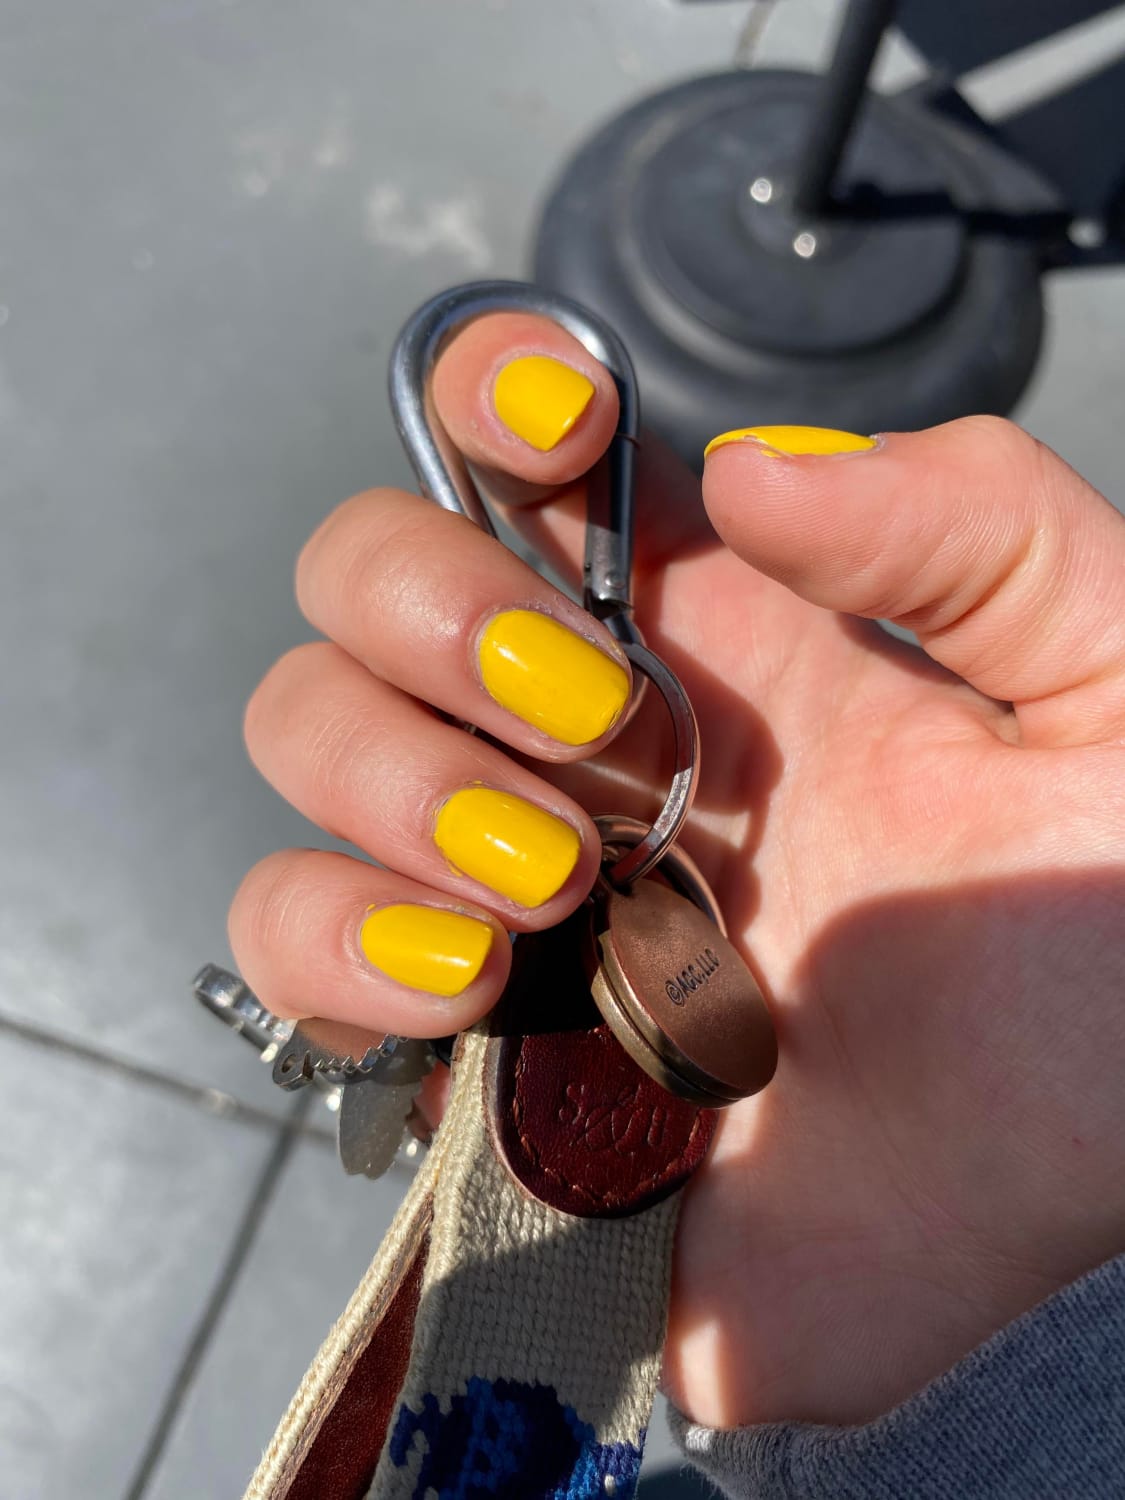 Took a hiatus from painting my nails, started back up with this beautiful yellow as I start to let them grow out again!